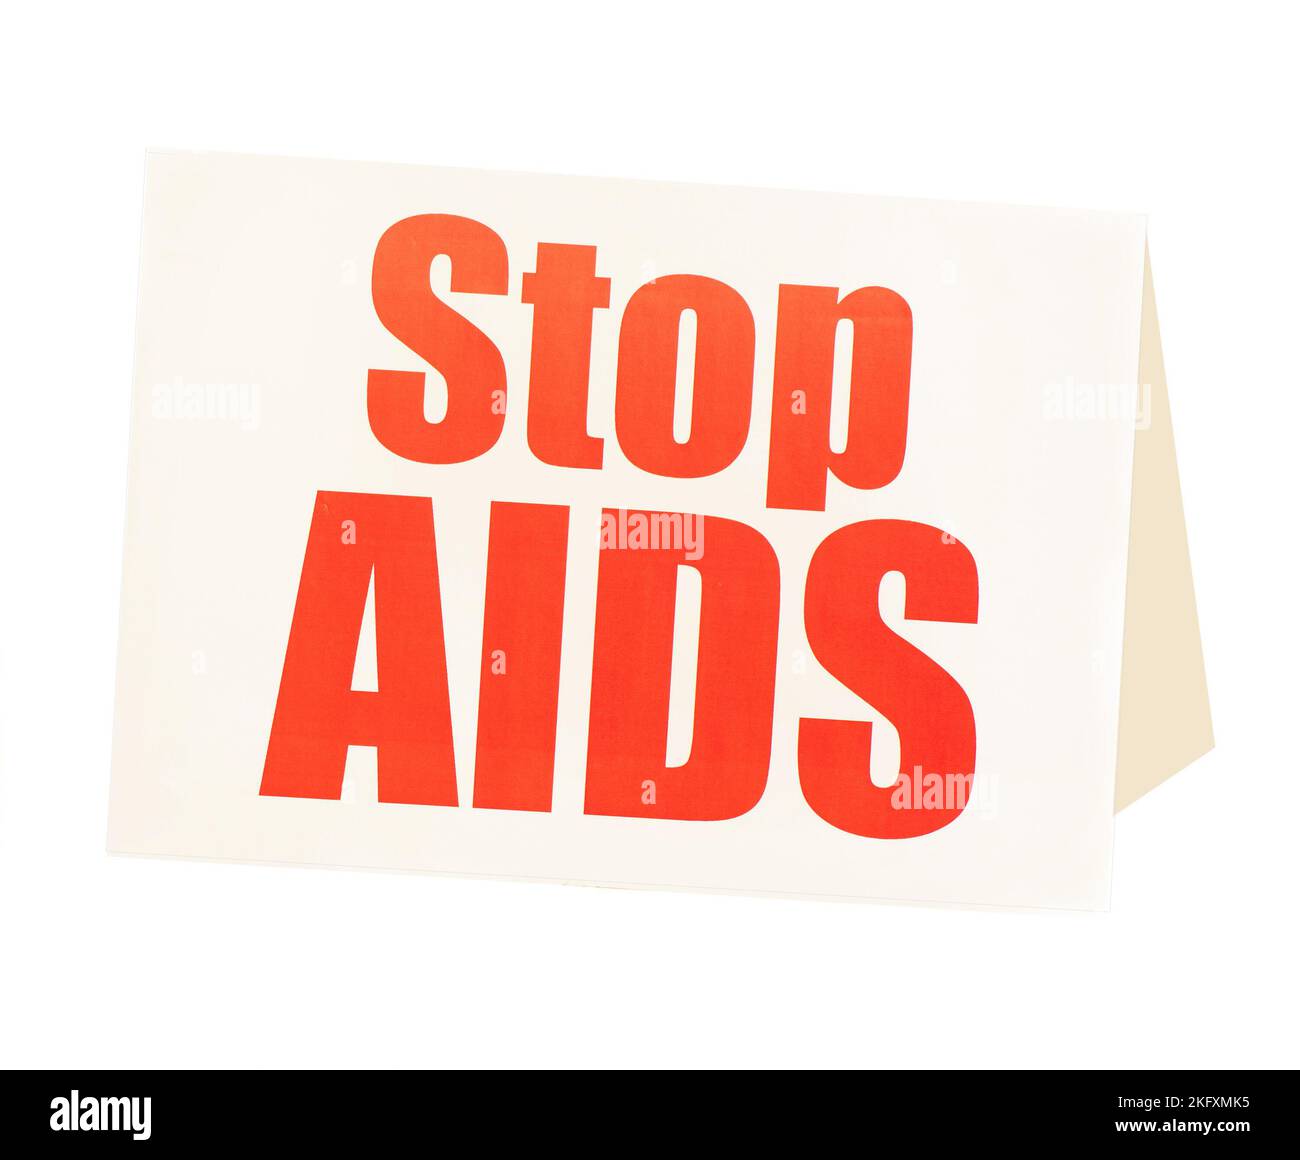 Aids hiv Cut Out Stock Images & Pictures - Alamy